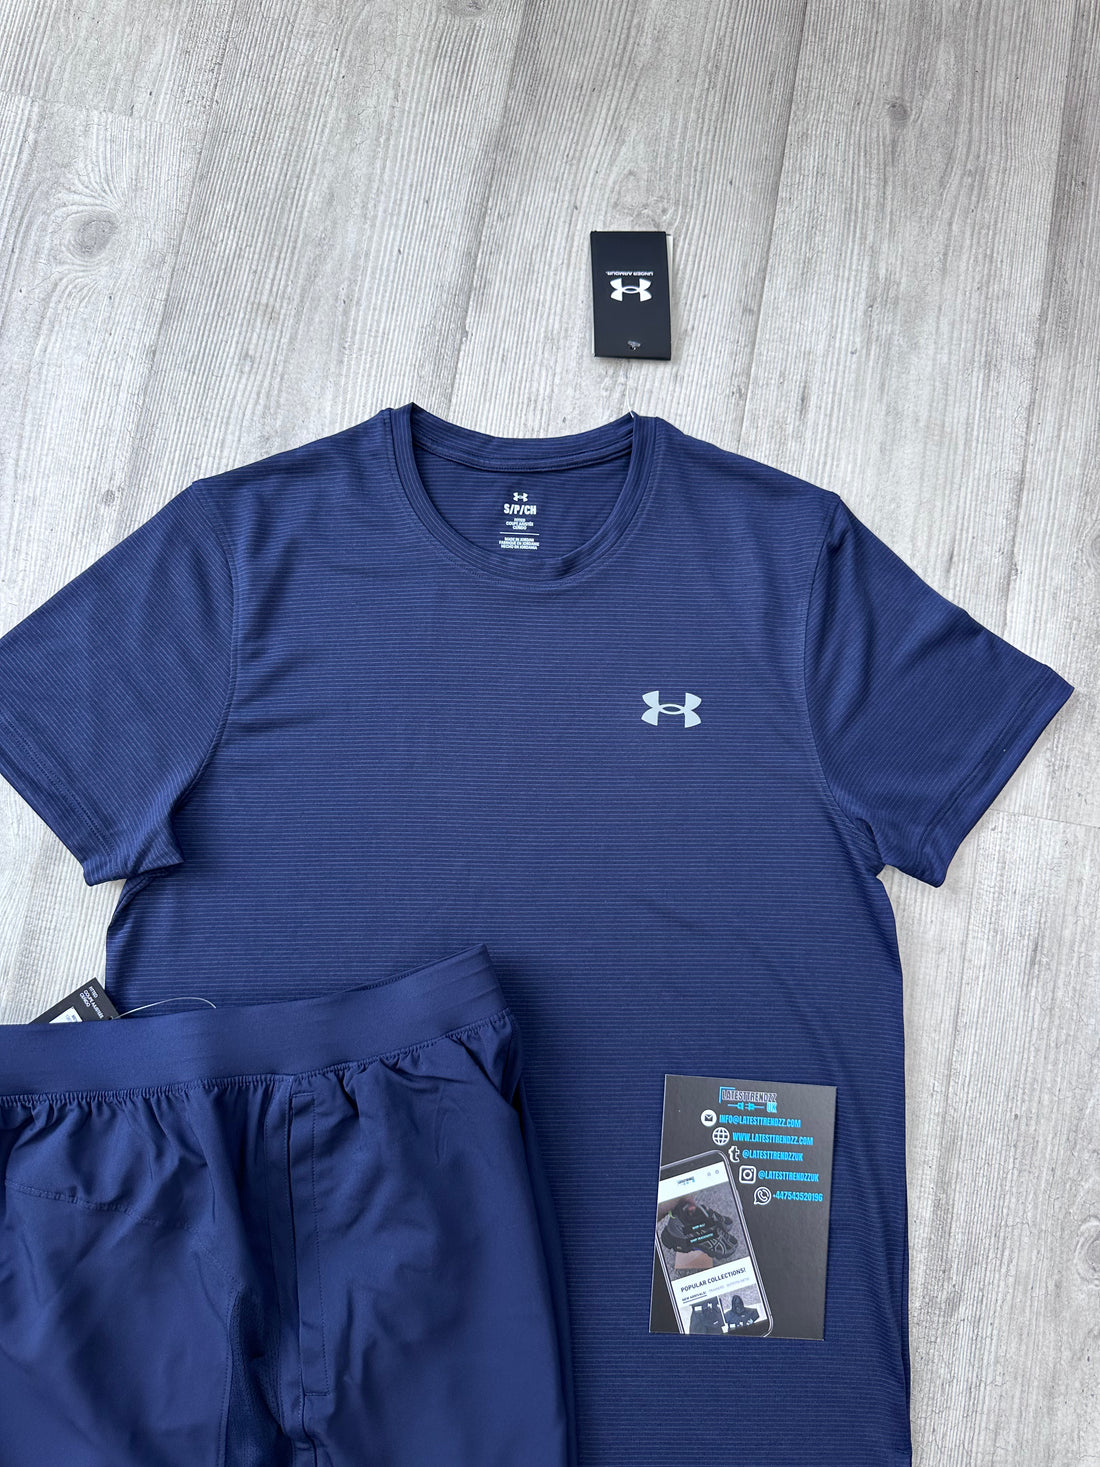 UNDER ARMOUR LAUNCH SET - NAVY